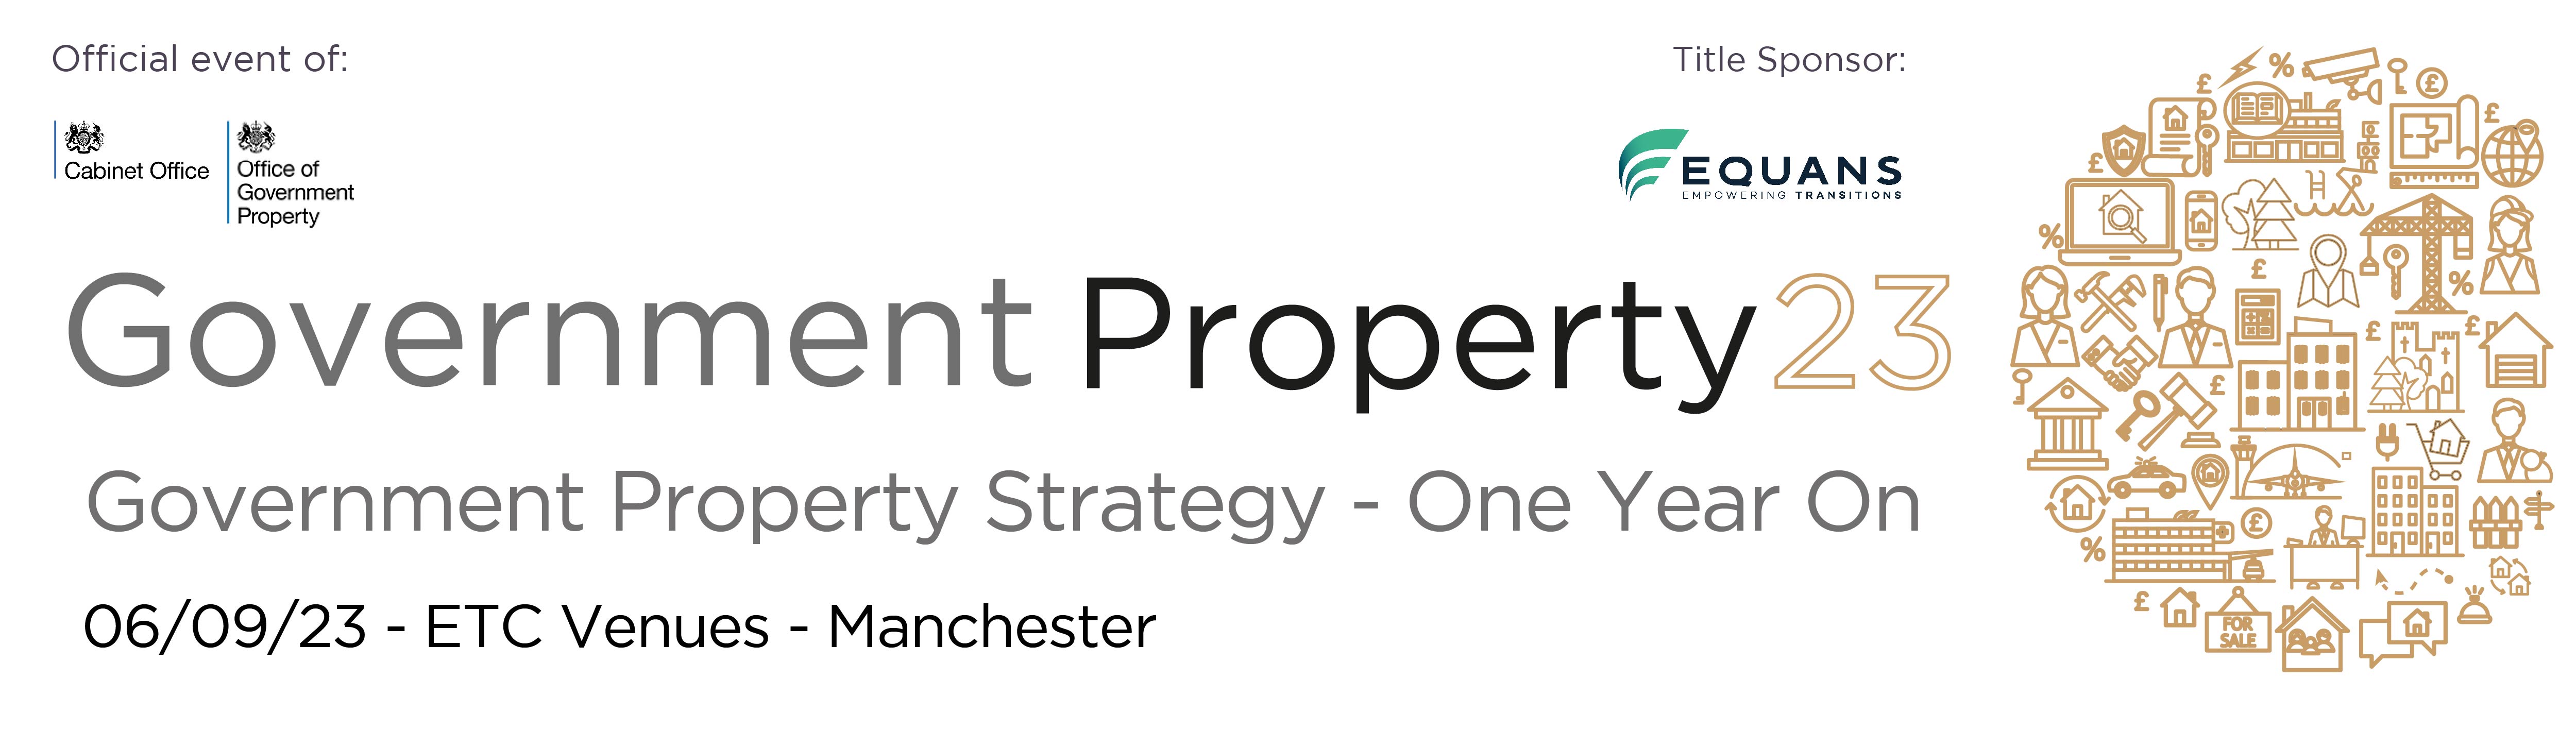 Government Property Strategy - One year on